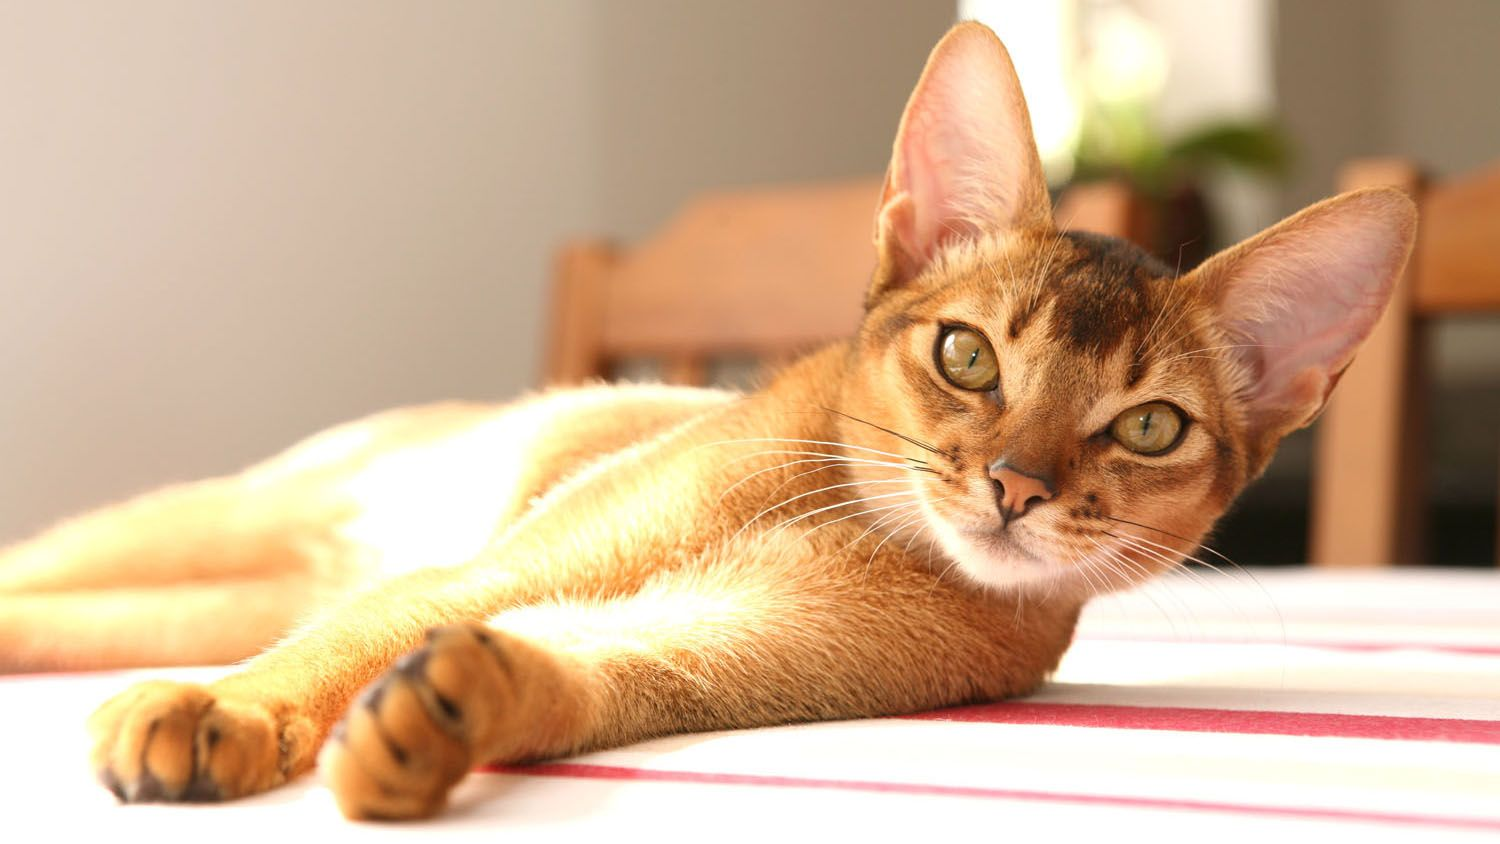 Abyssinian lying on its side on a table with a striped cloth